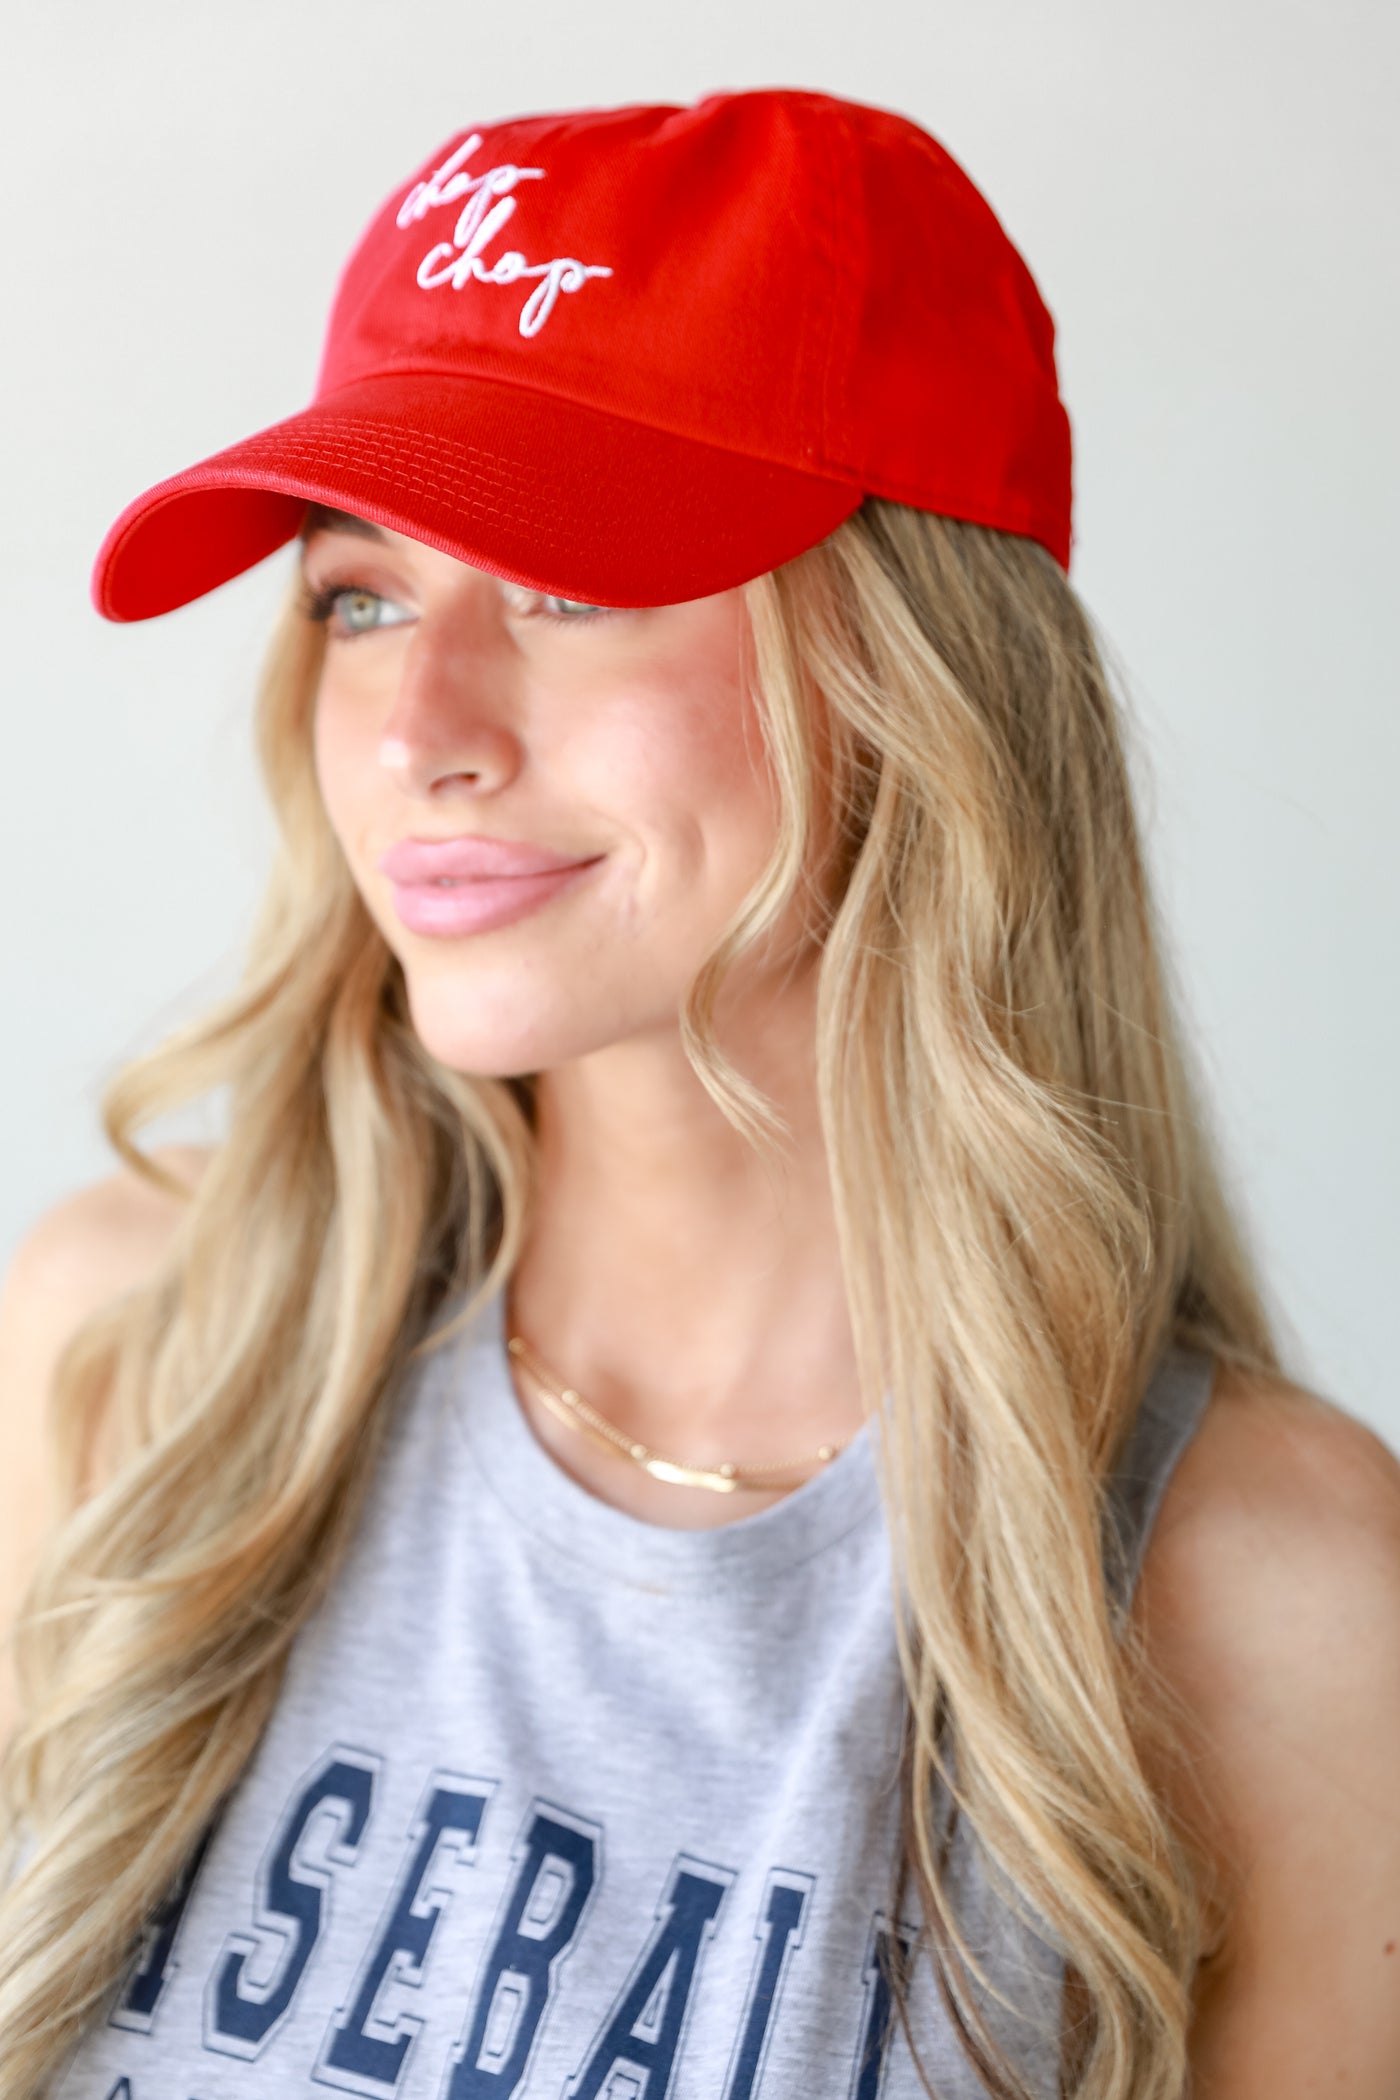 Red Chop Chop Script Embroidered Hat close up